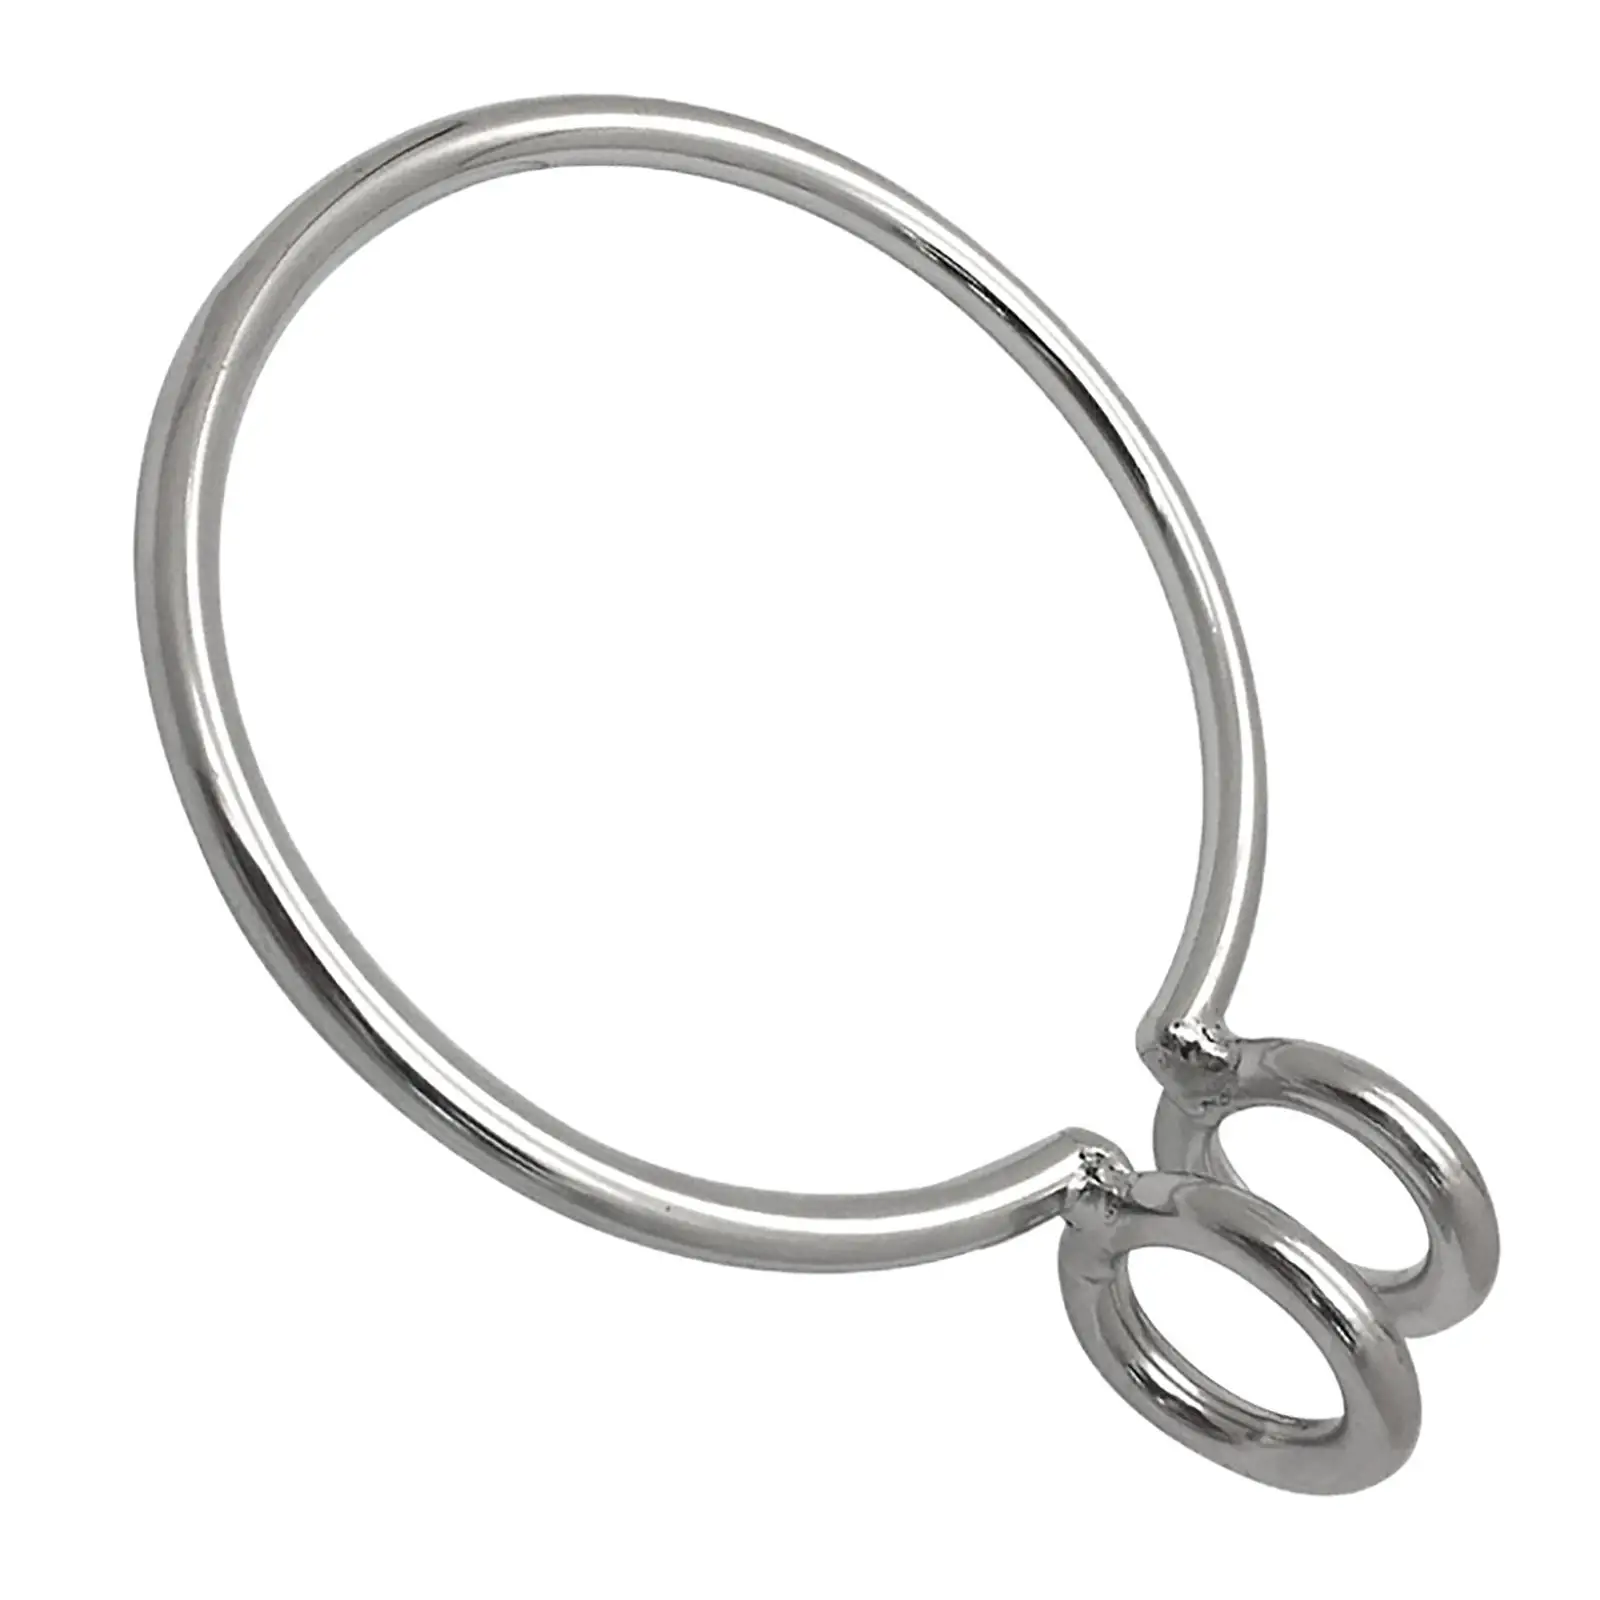 Anchor Retrieval System Ring with 8mm Wire Marine Grade , Suitable for Most Ships and Yachts Outdoors High Performance Premium